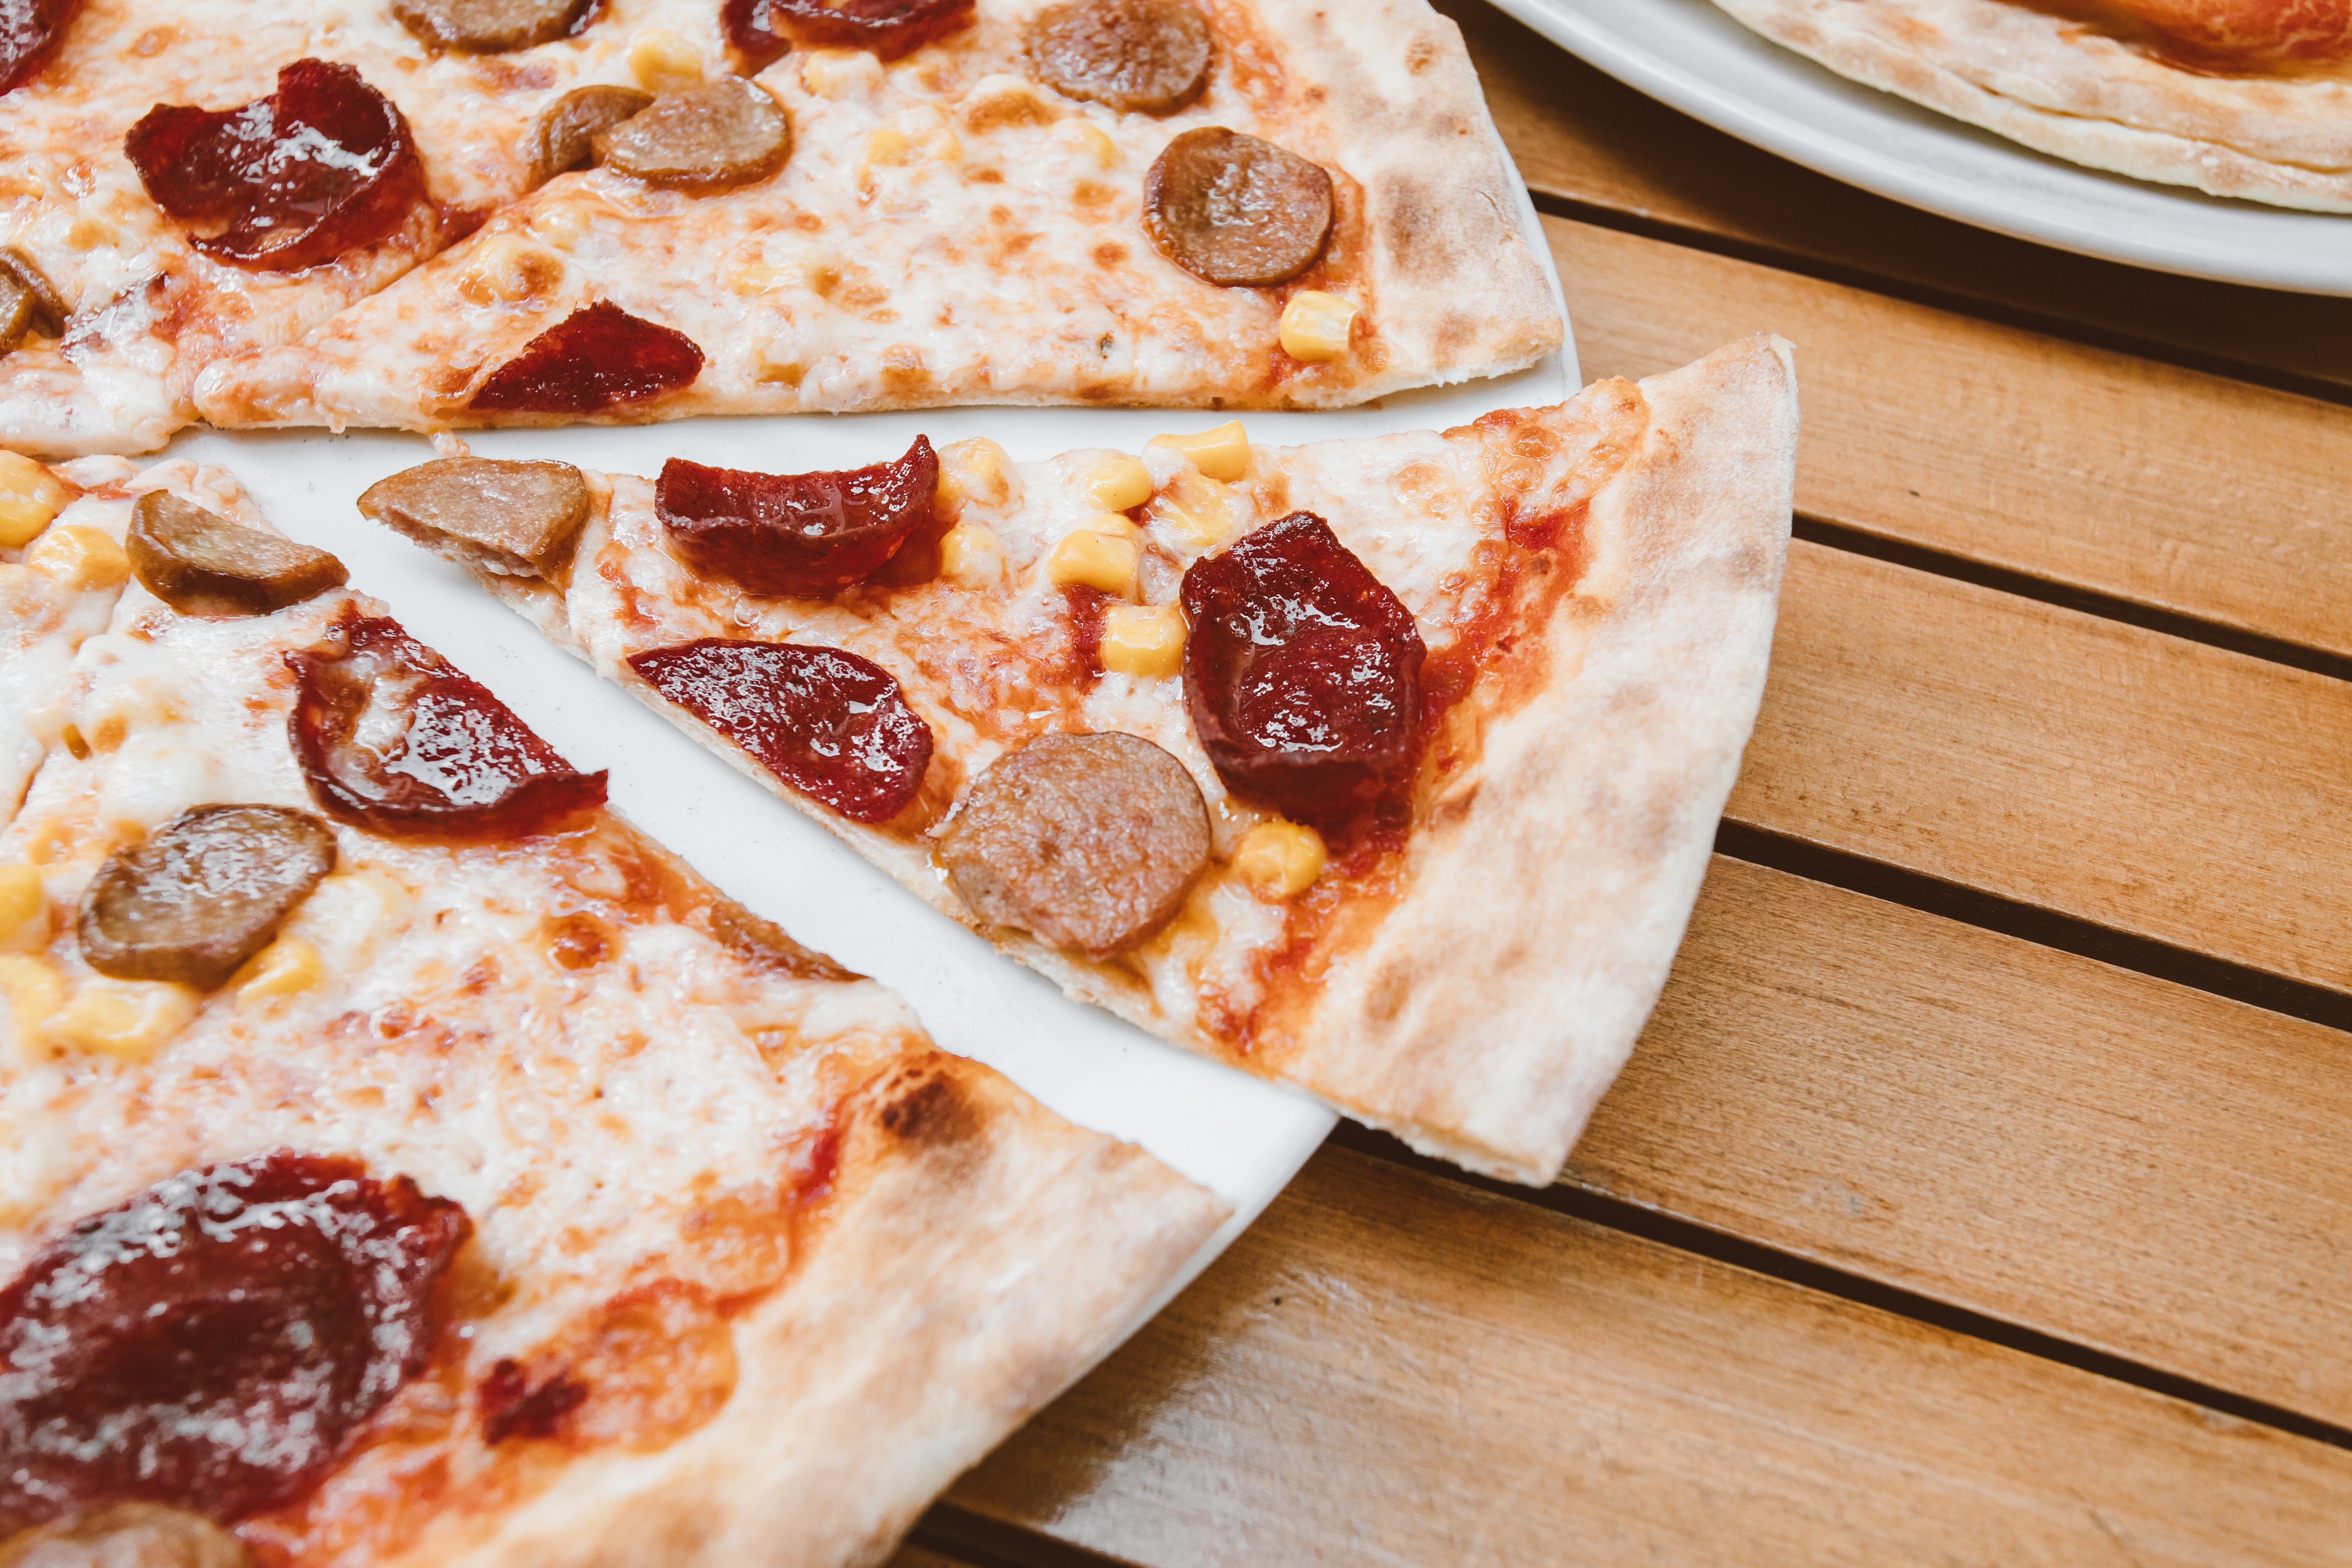 They ordered pizza later that evening. | Source: Pexels